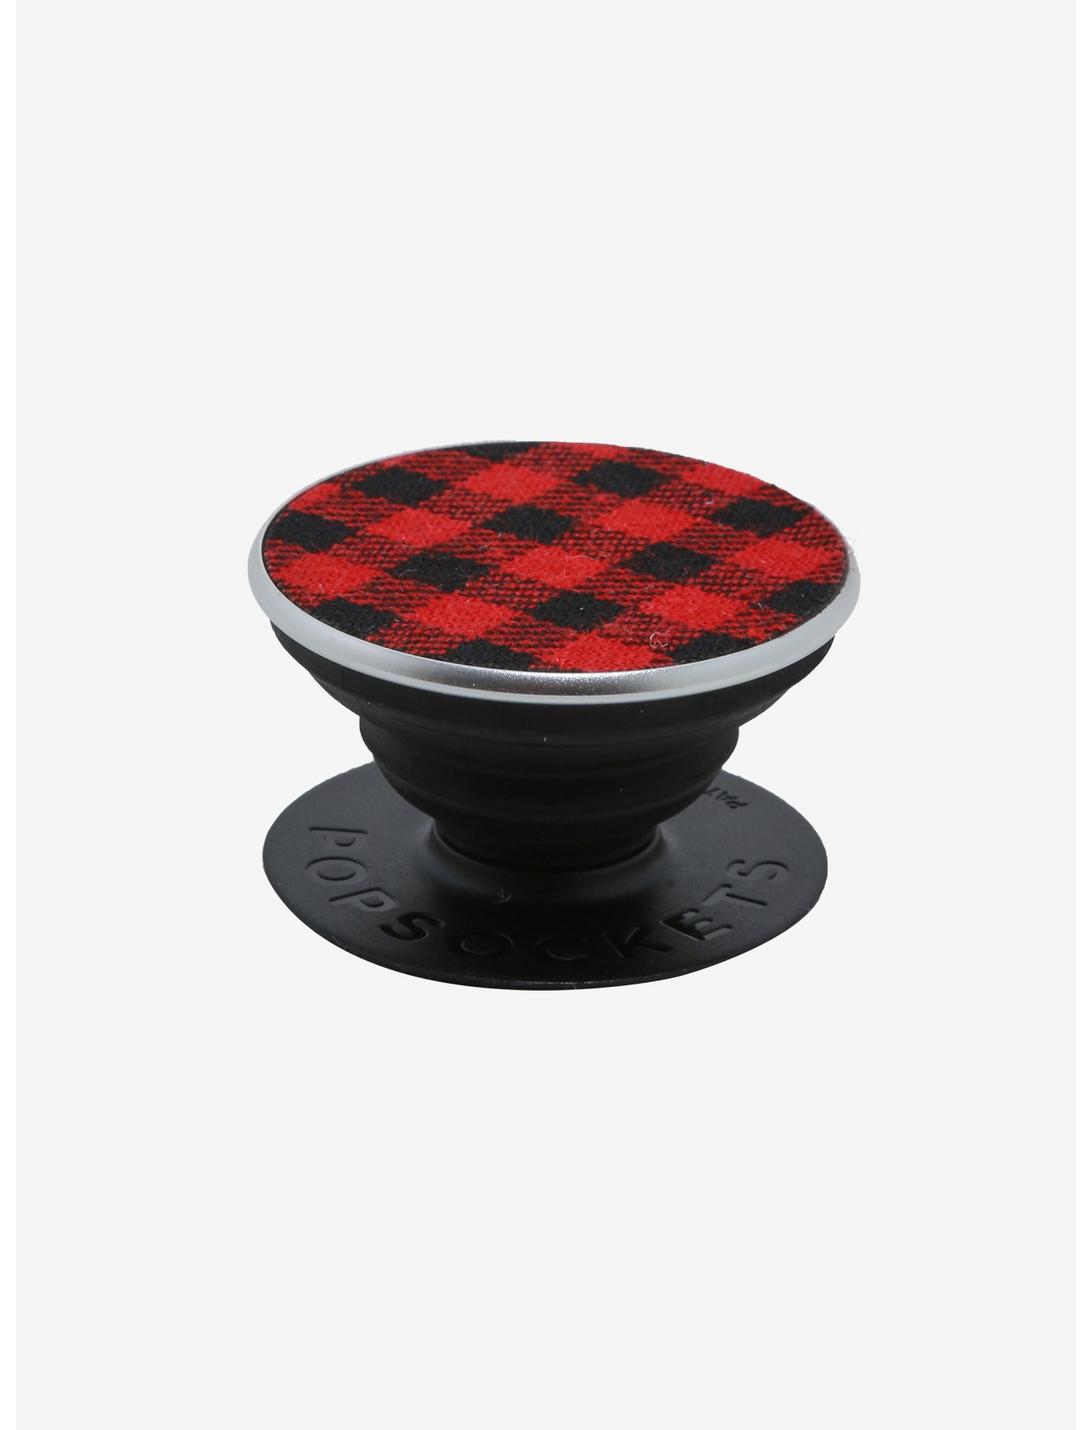 PopSockets Red & Black Plaid Fabric Phone Grip & Stand, , hi-res